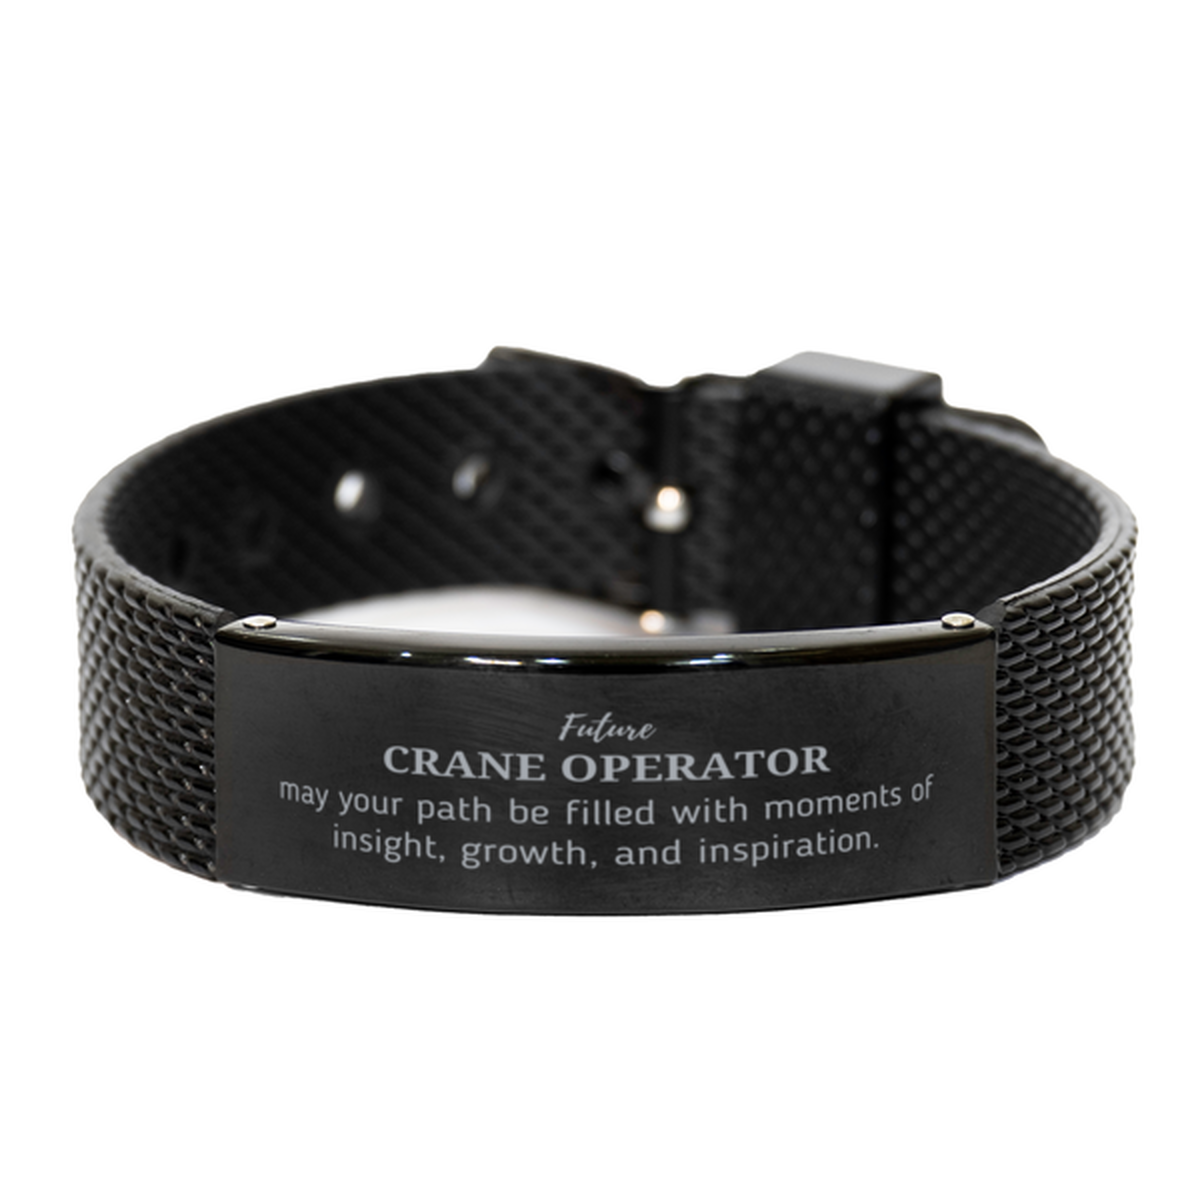 Future Crane Operator Gifts, May your path be filled with moments of insight, Graduation Gifts for New Crane Operator, Christmas Unique Black Shark Mesh Bracelet For Men, Women, Friends